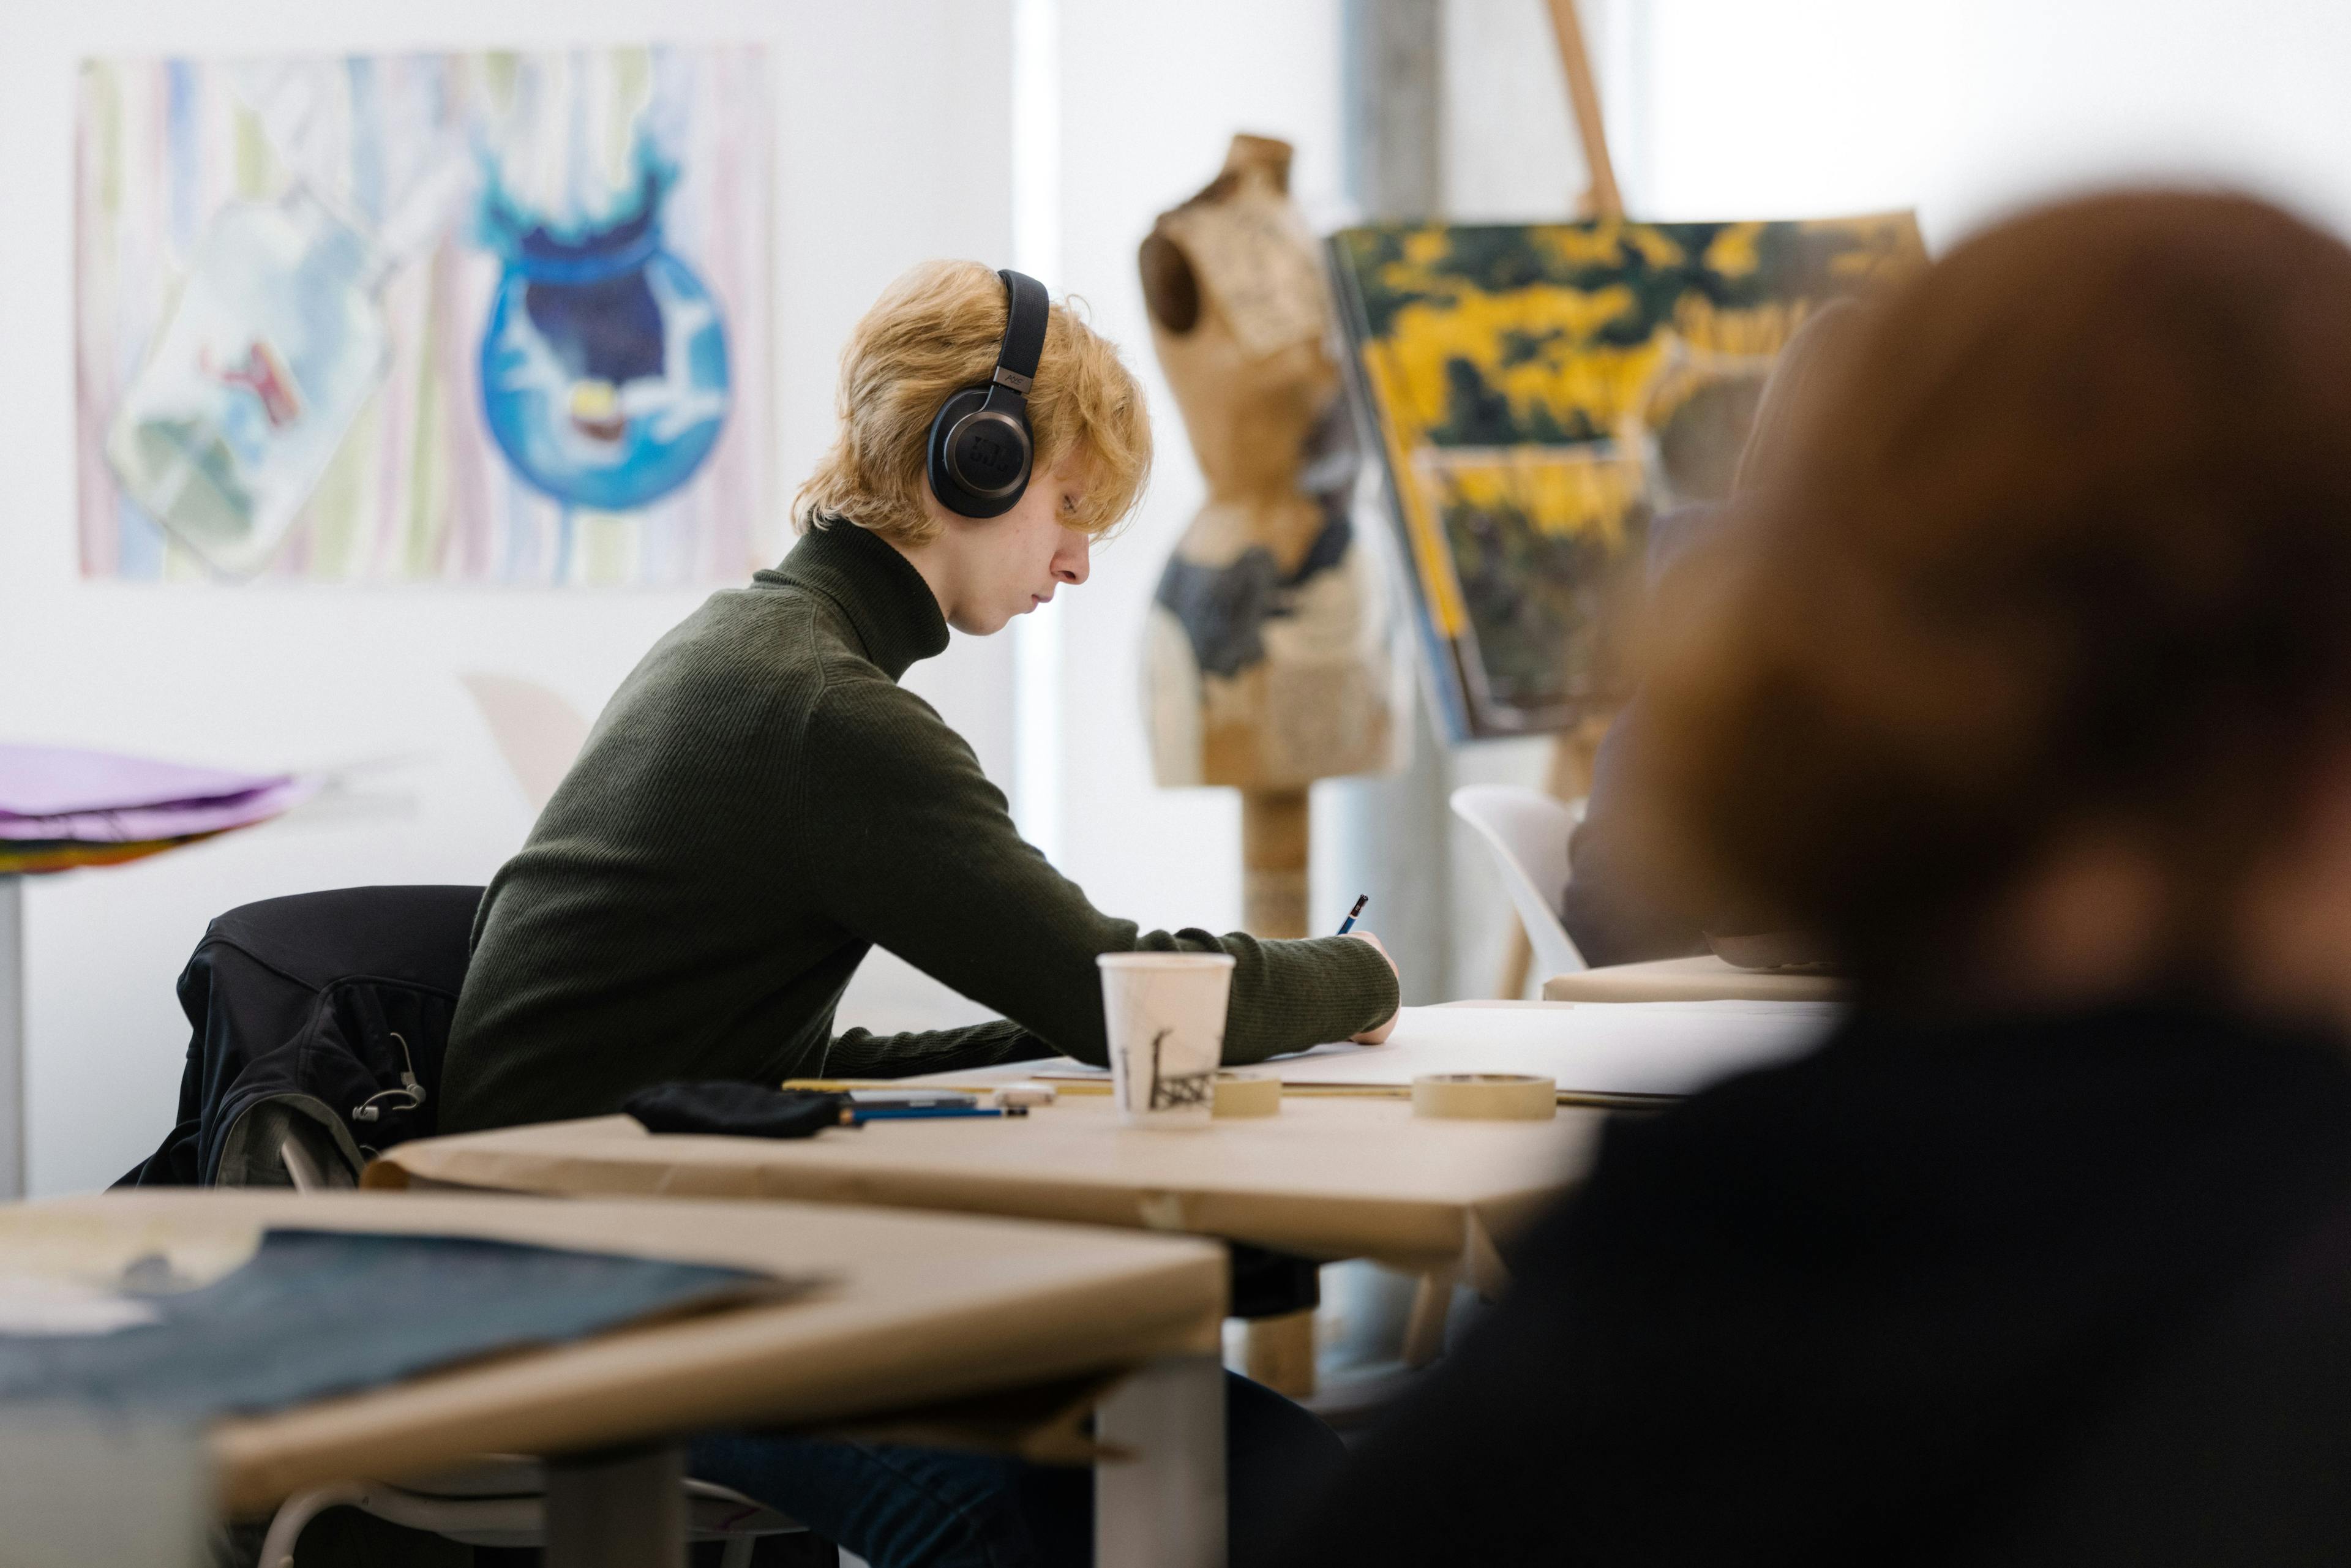 A young artist sits at a desk with headphones on. In the background, paintings and sculptural artworks are displayed.